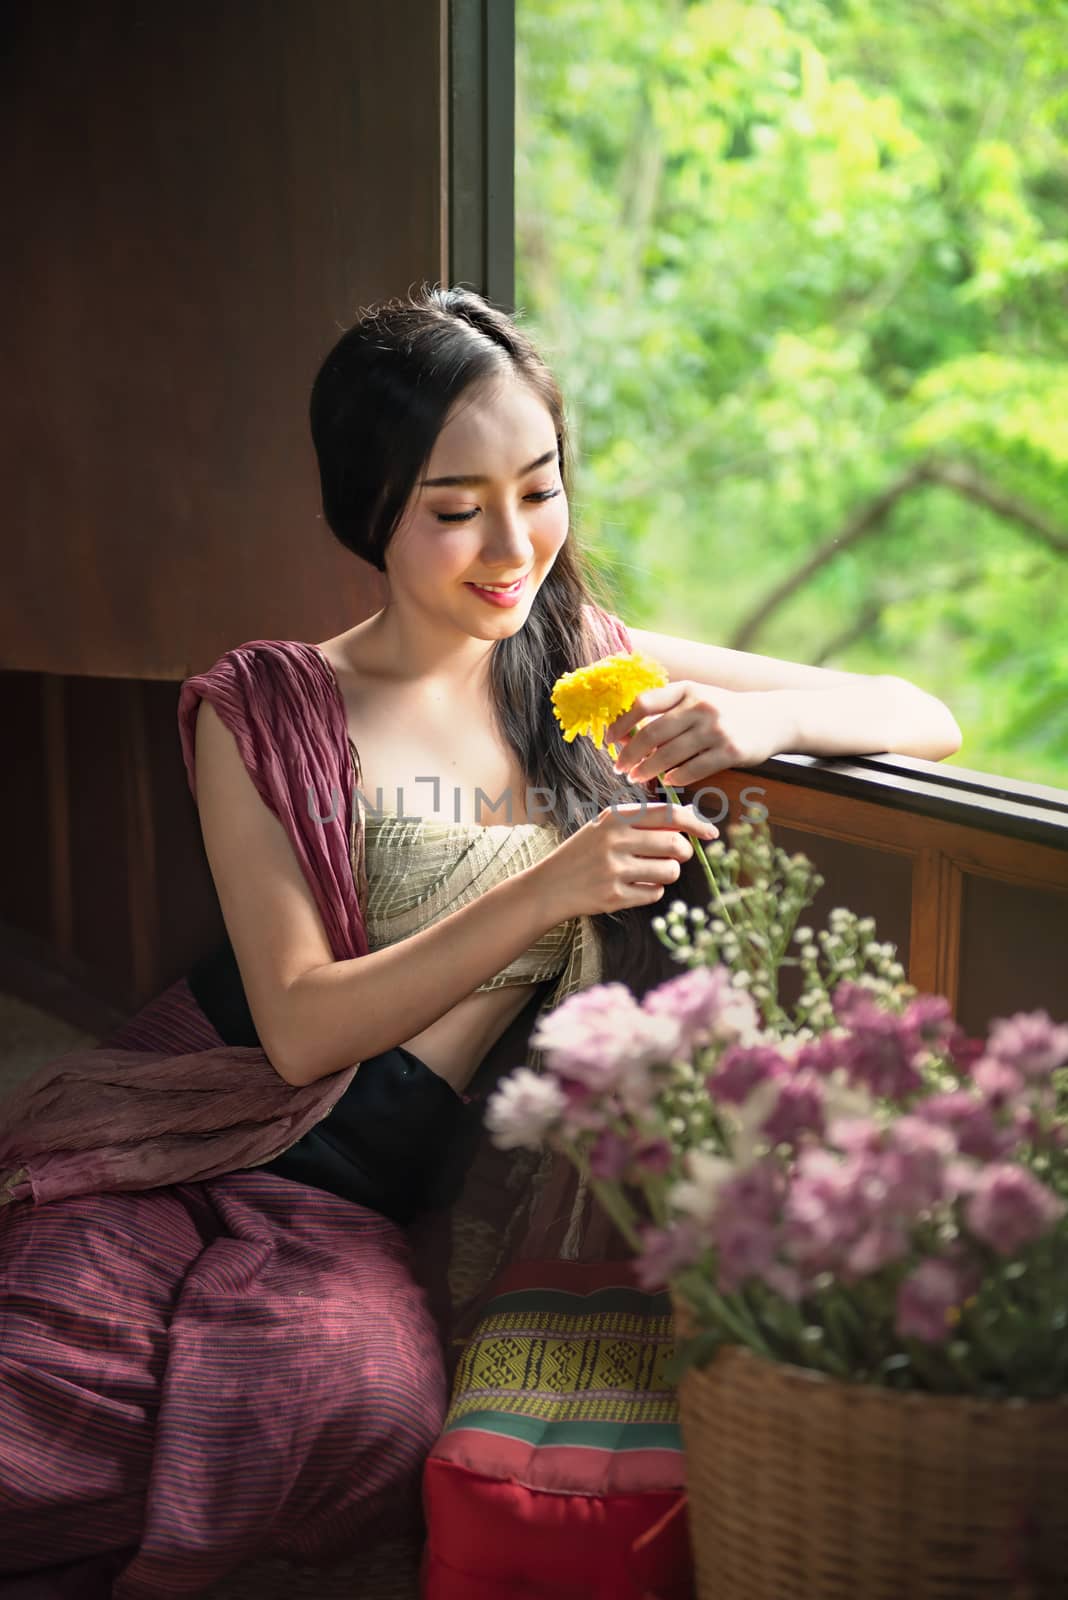 beautiful woman in traditional asian dresses holding flowers sitting near the windows